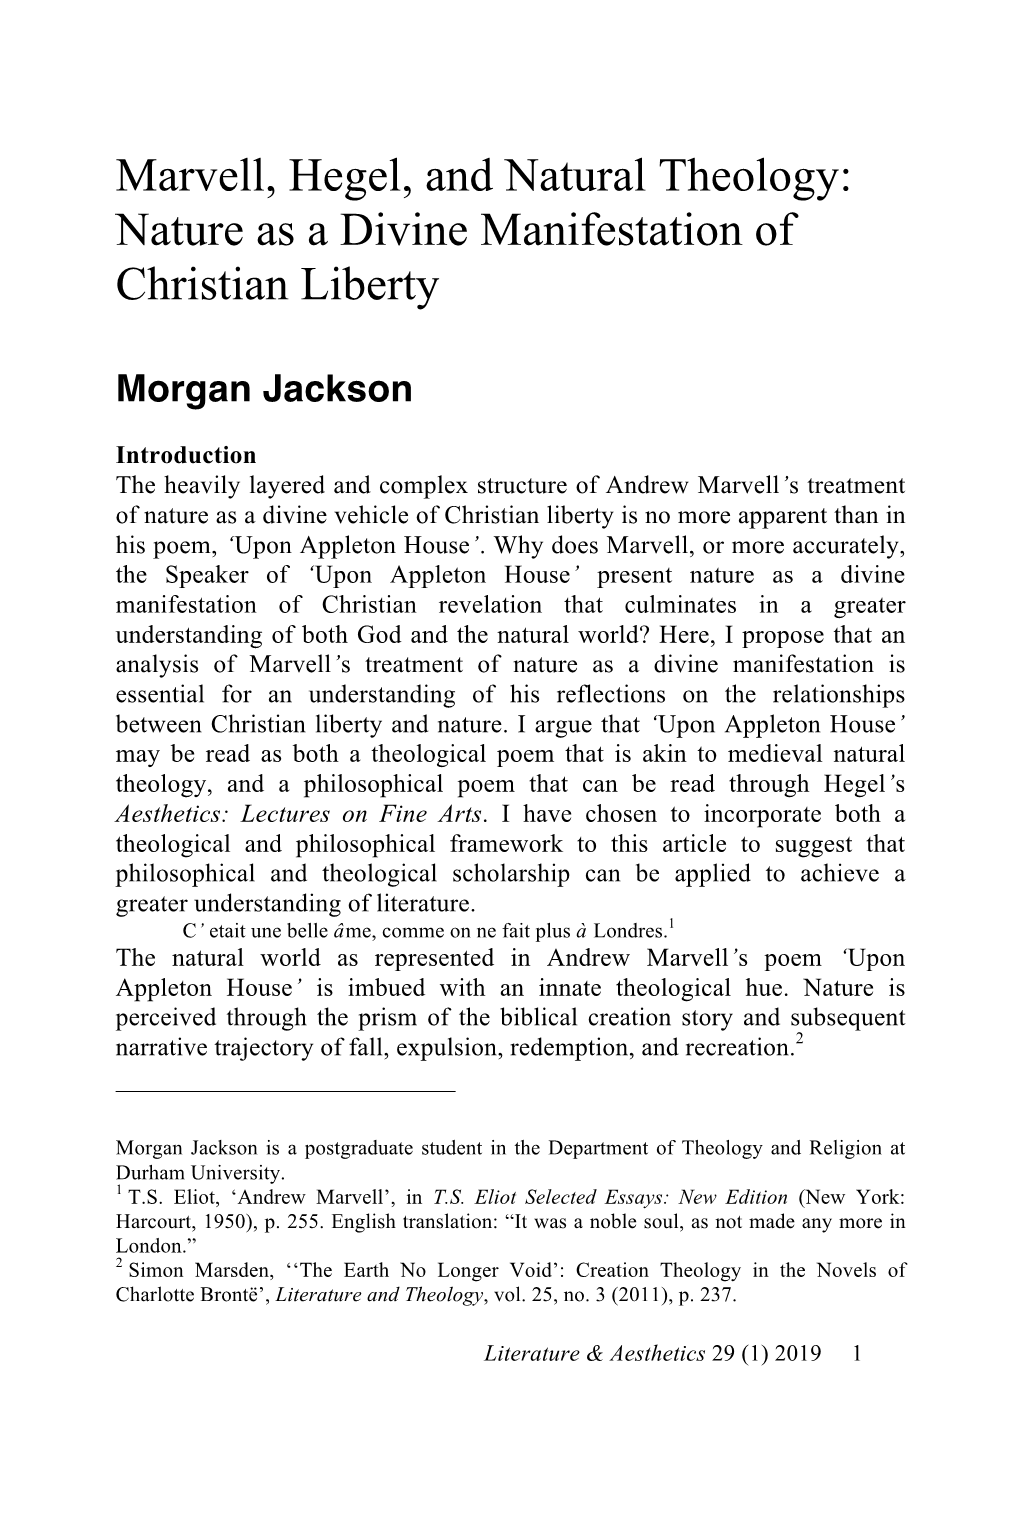 Marvell, Hegel, and Natural Theology: Nature As a Divine Manifestation of Christian Liberty